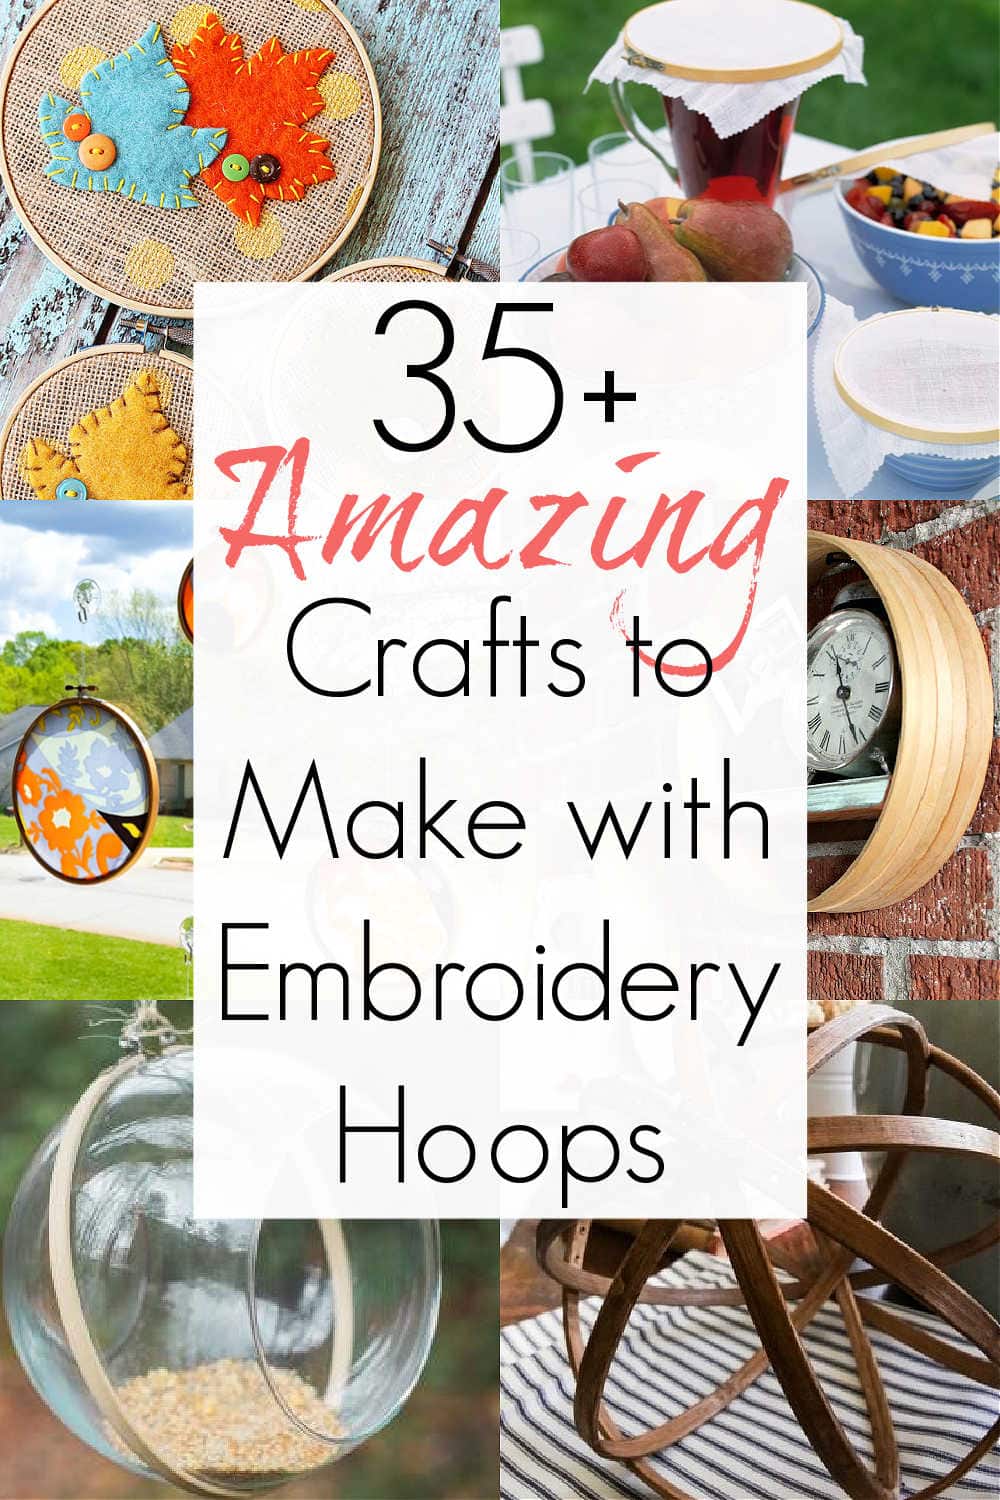 embroidery hoop crafts and project ideas